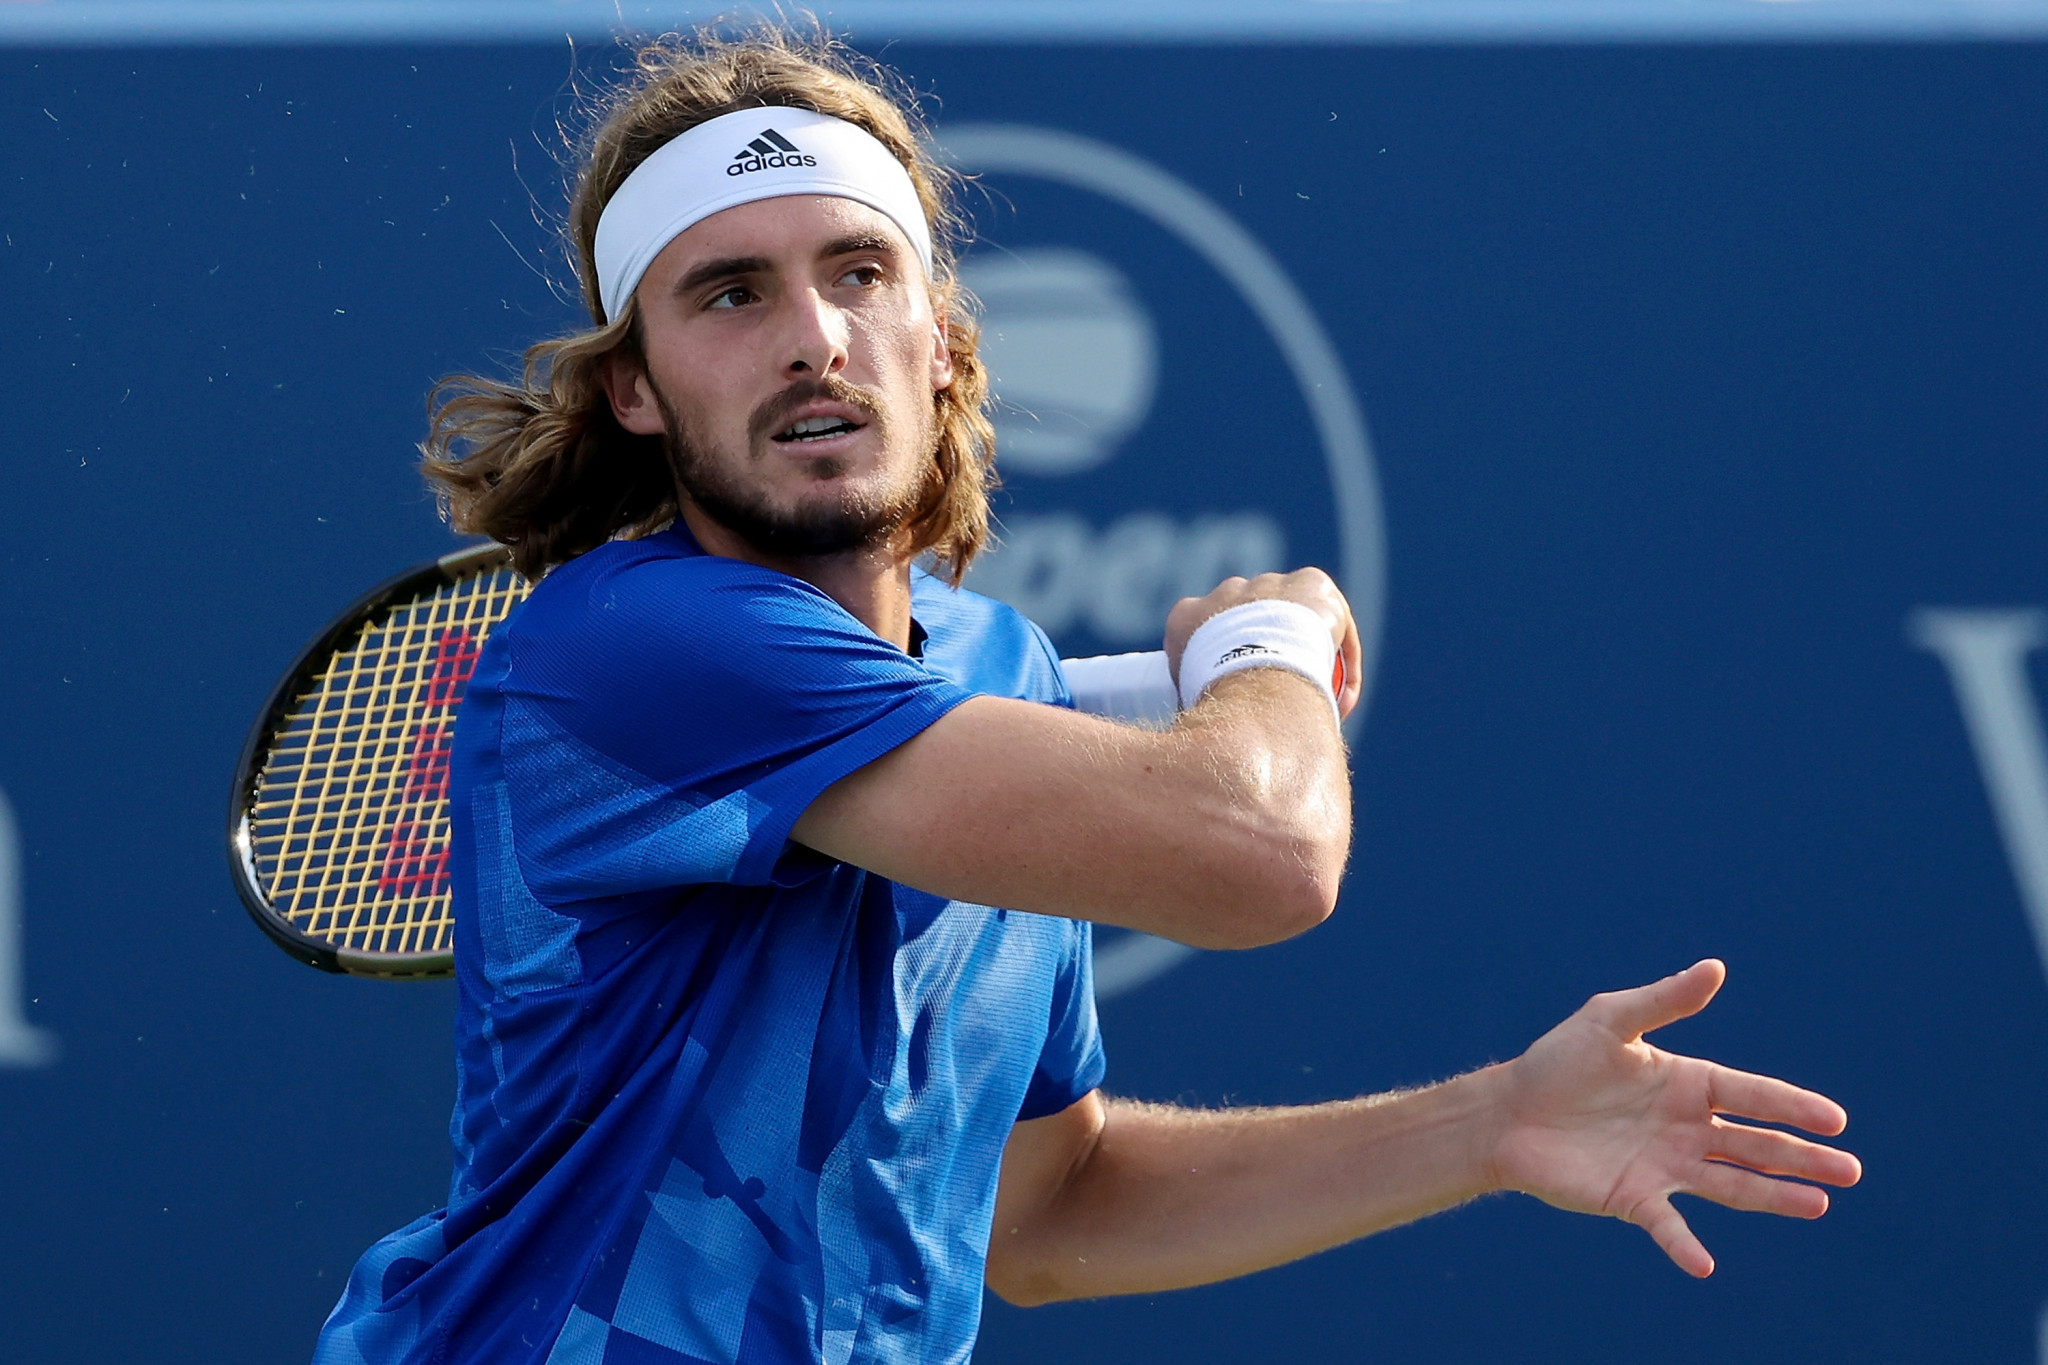 COVID-19 vaccinations have proved a major talking point on the ATP and WTA Tours, with men's singles world number three Stefanos Tsitsipas of Greece commenting he would not get the jab unless it becomes mandatory ©Getty Images